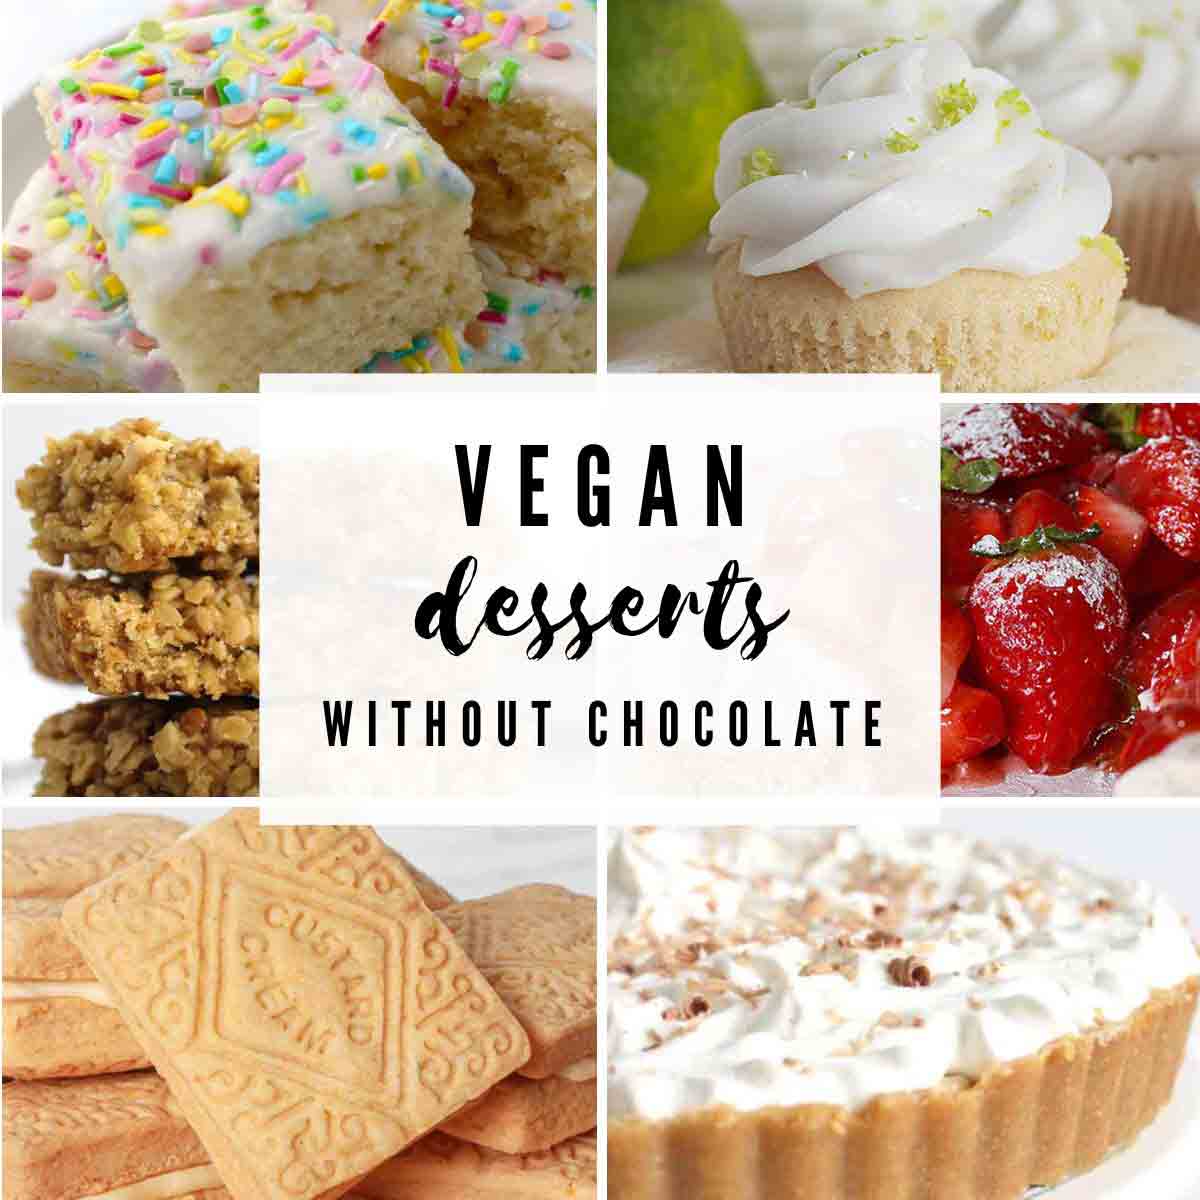 Images Of Vegan Desserts Without Chocolate With Text Overlay